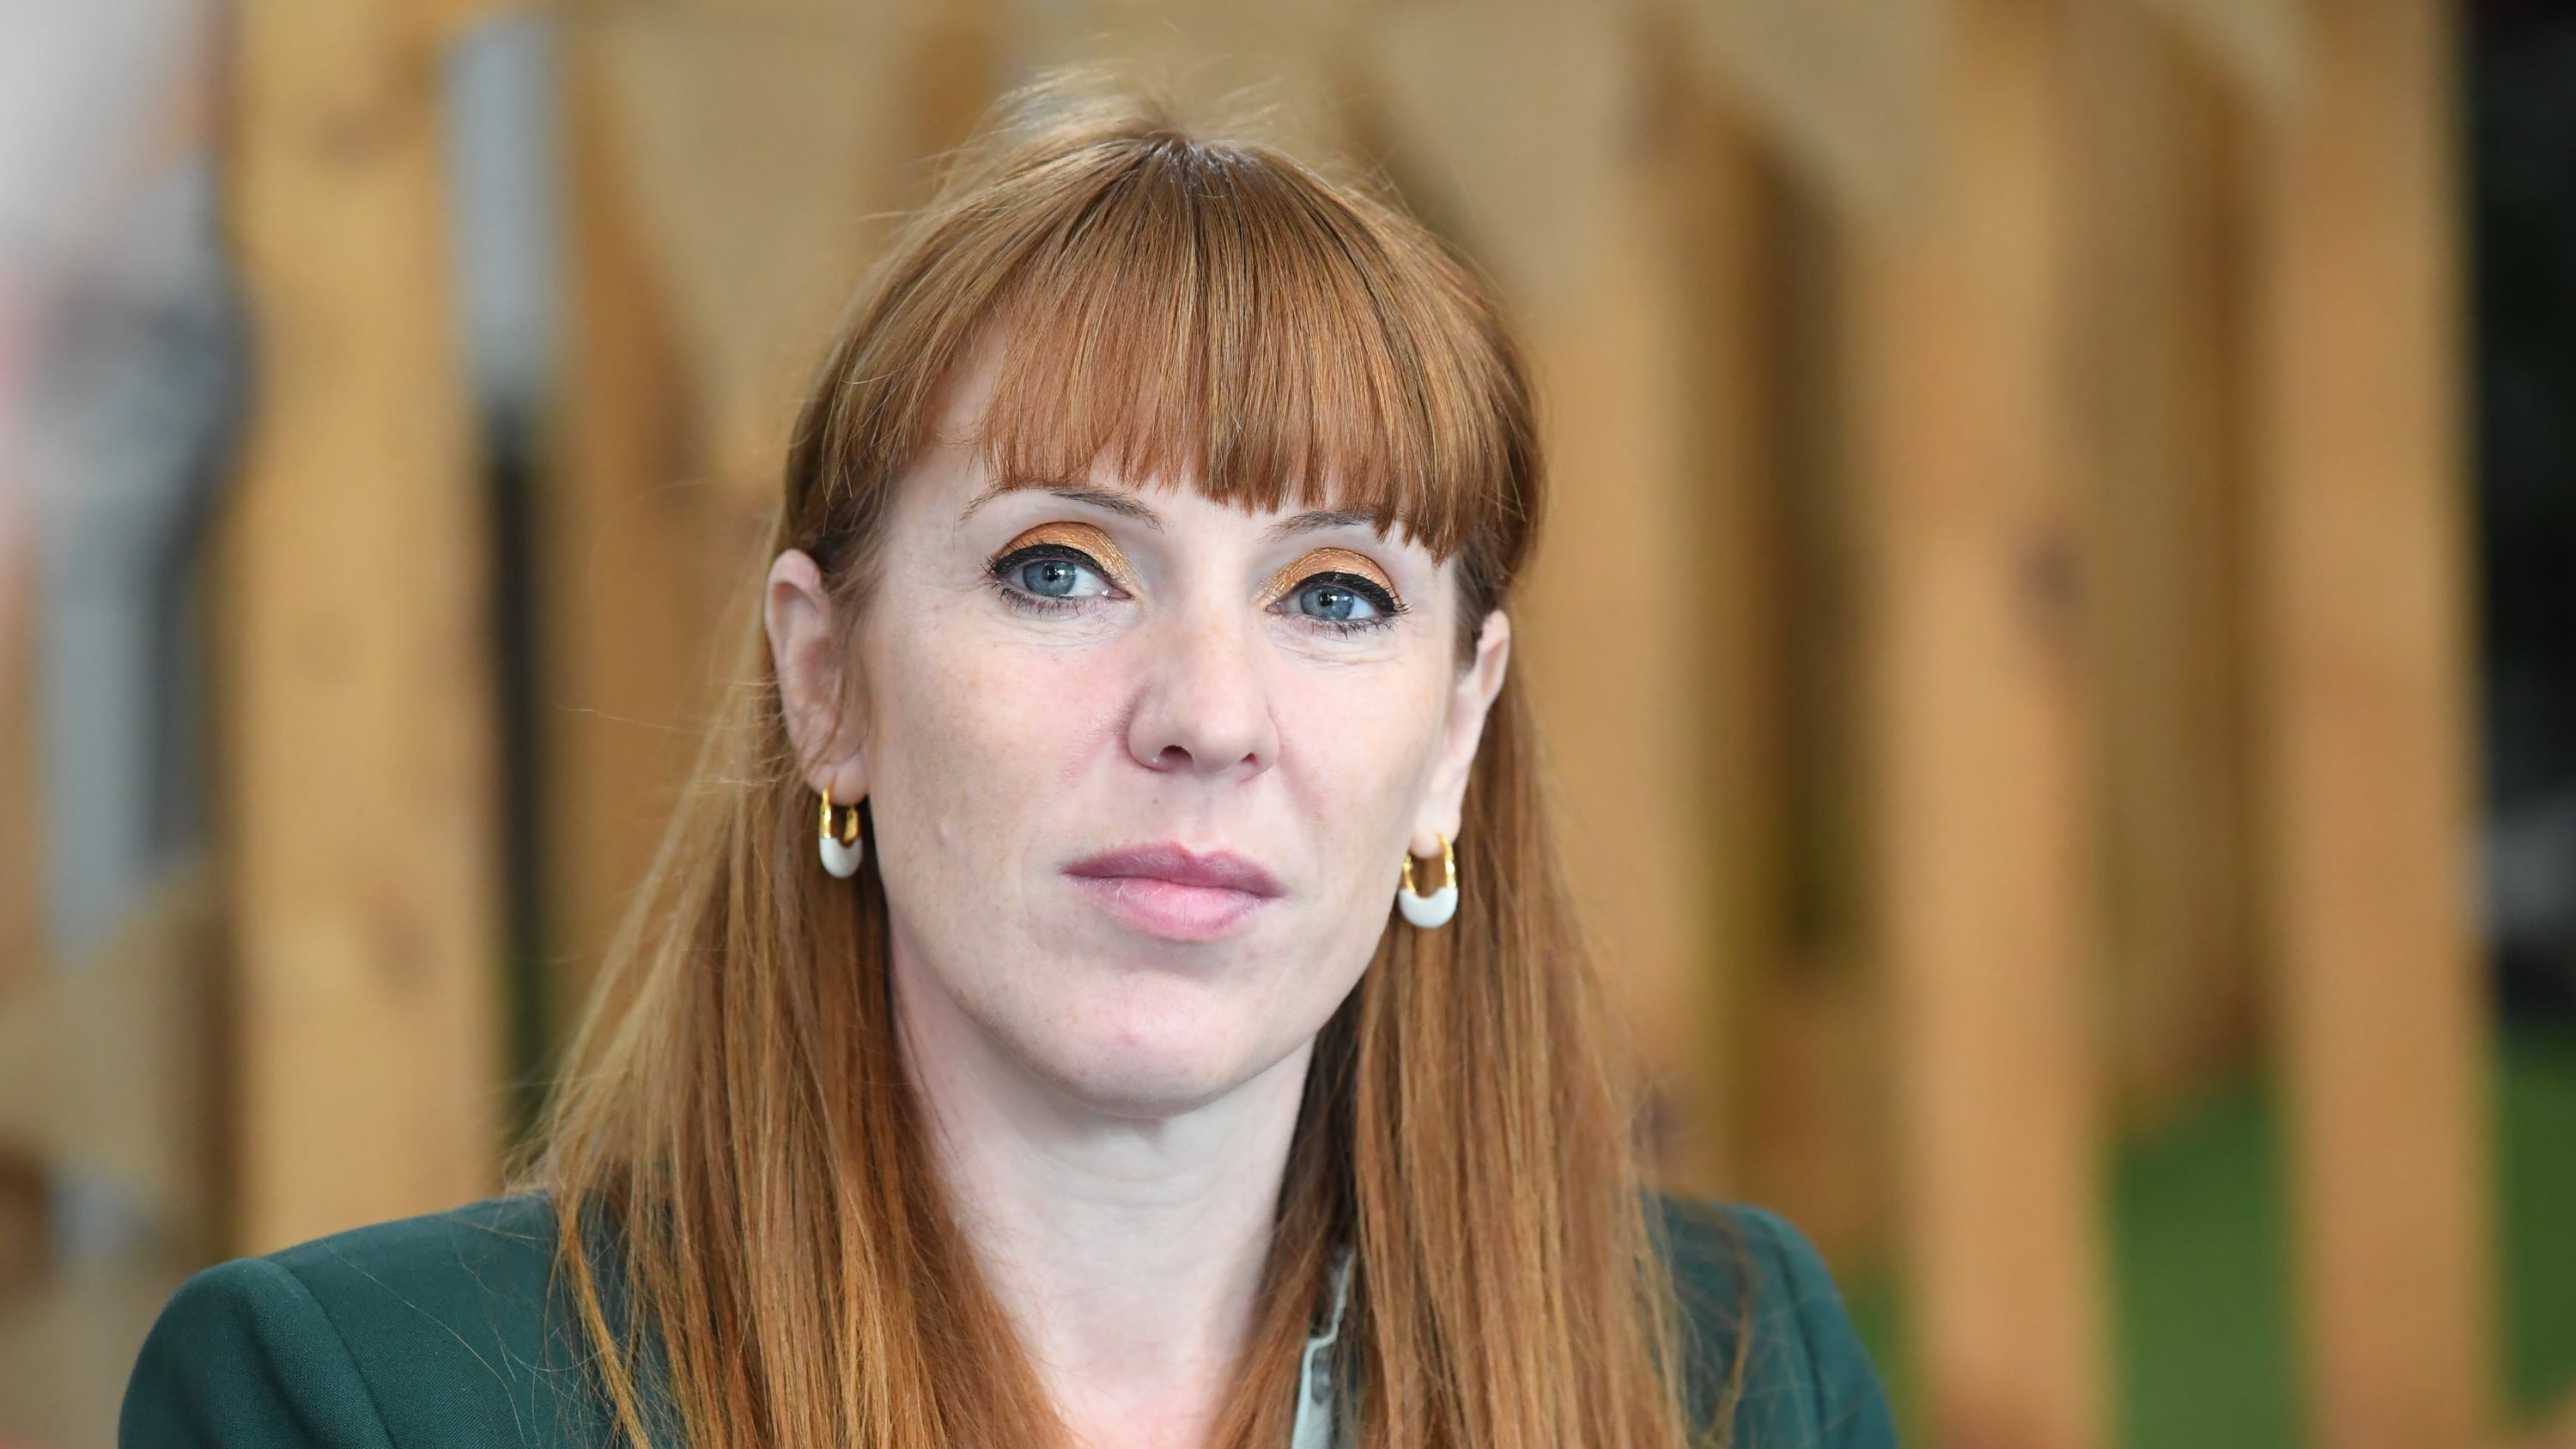 Deputy Labour leader Angela Rayner used to be a care worker